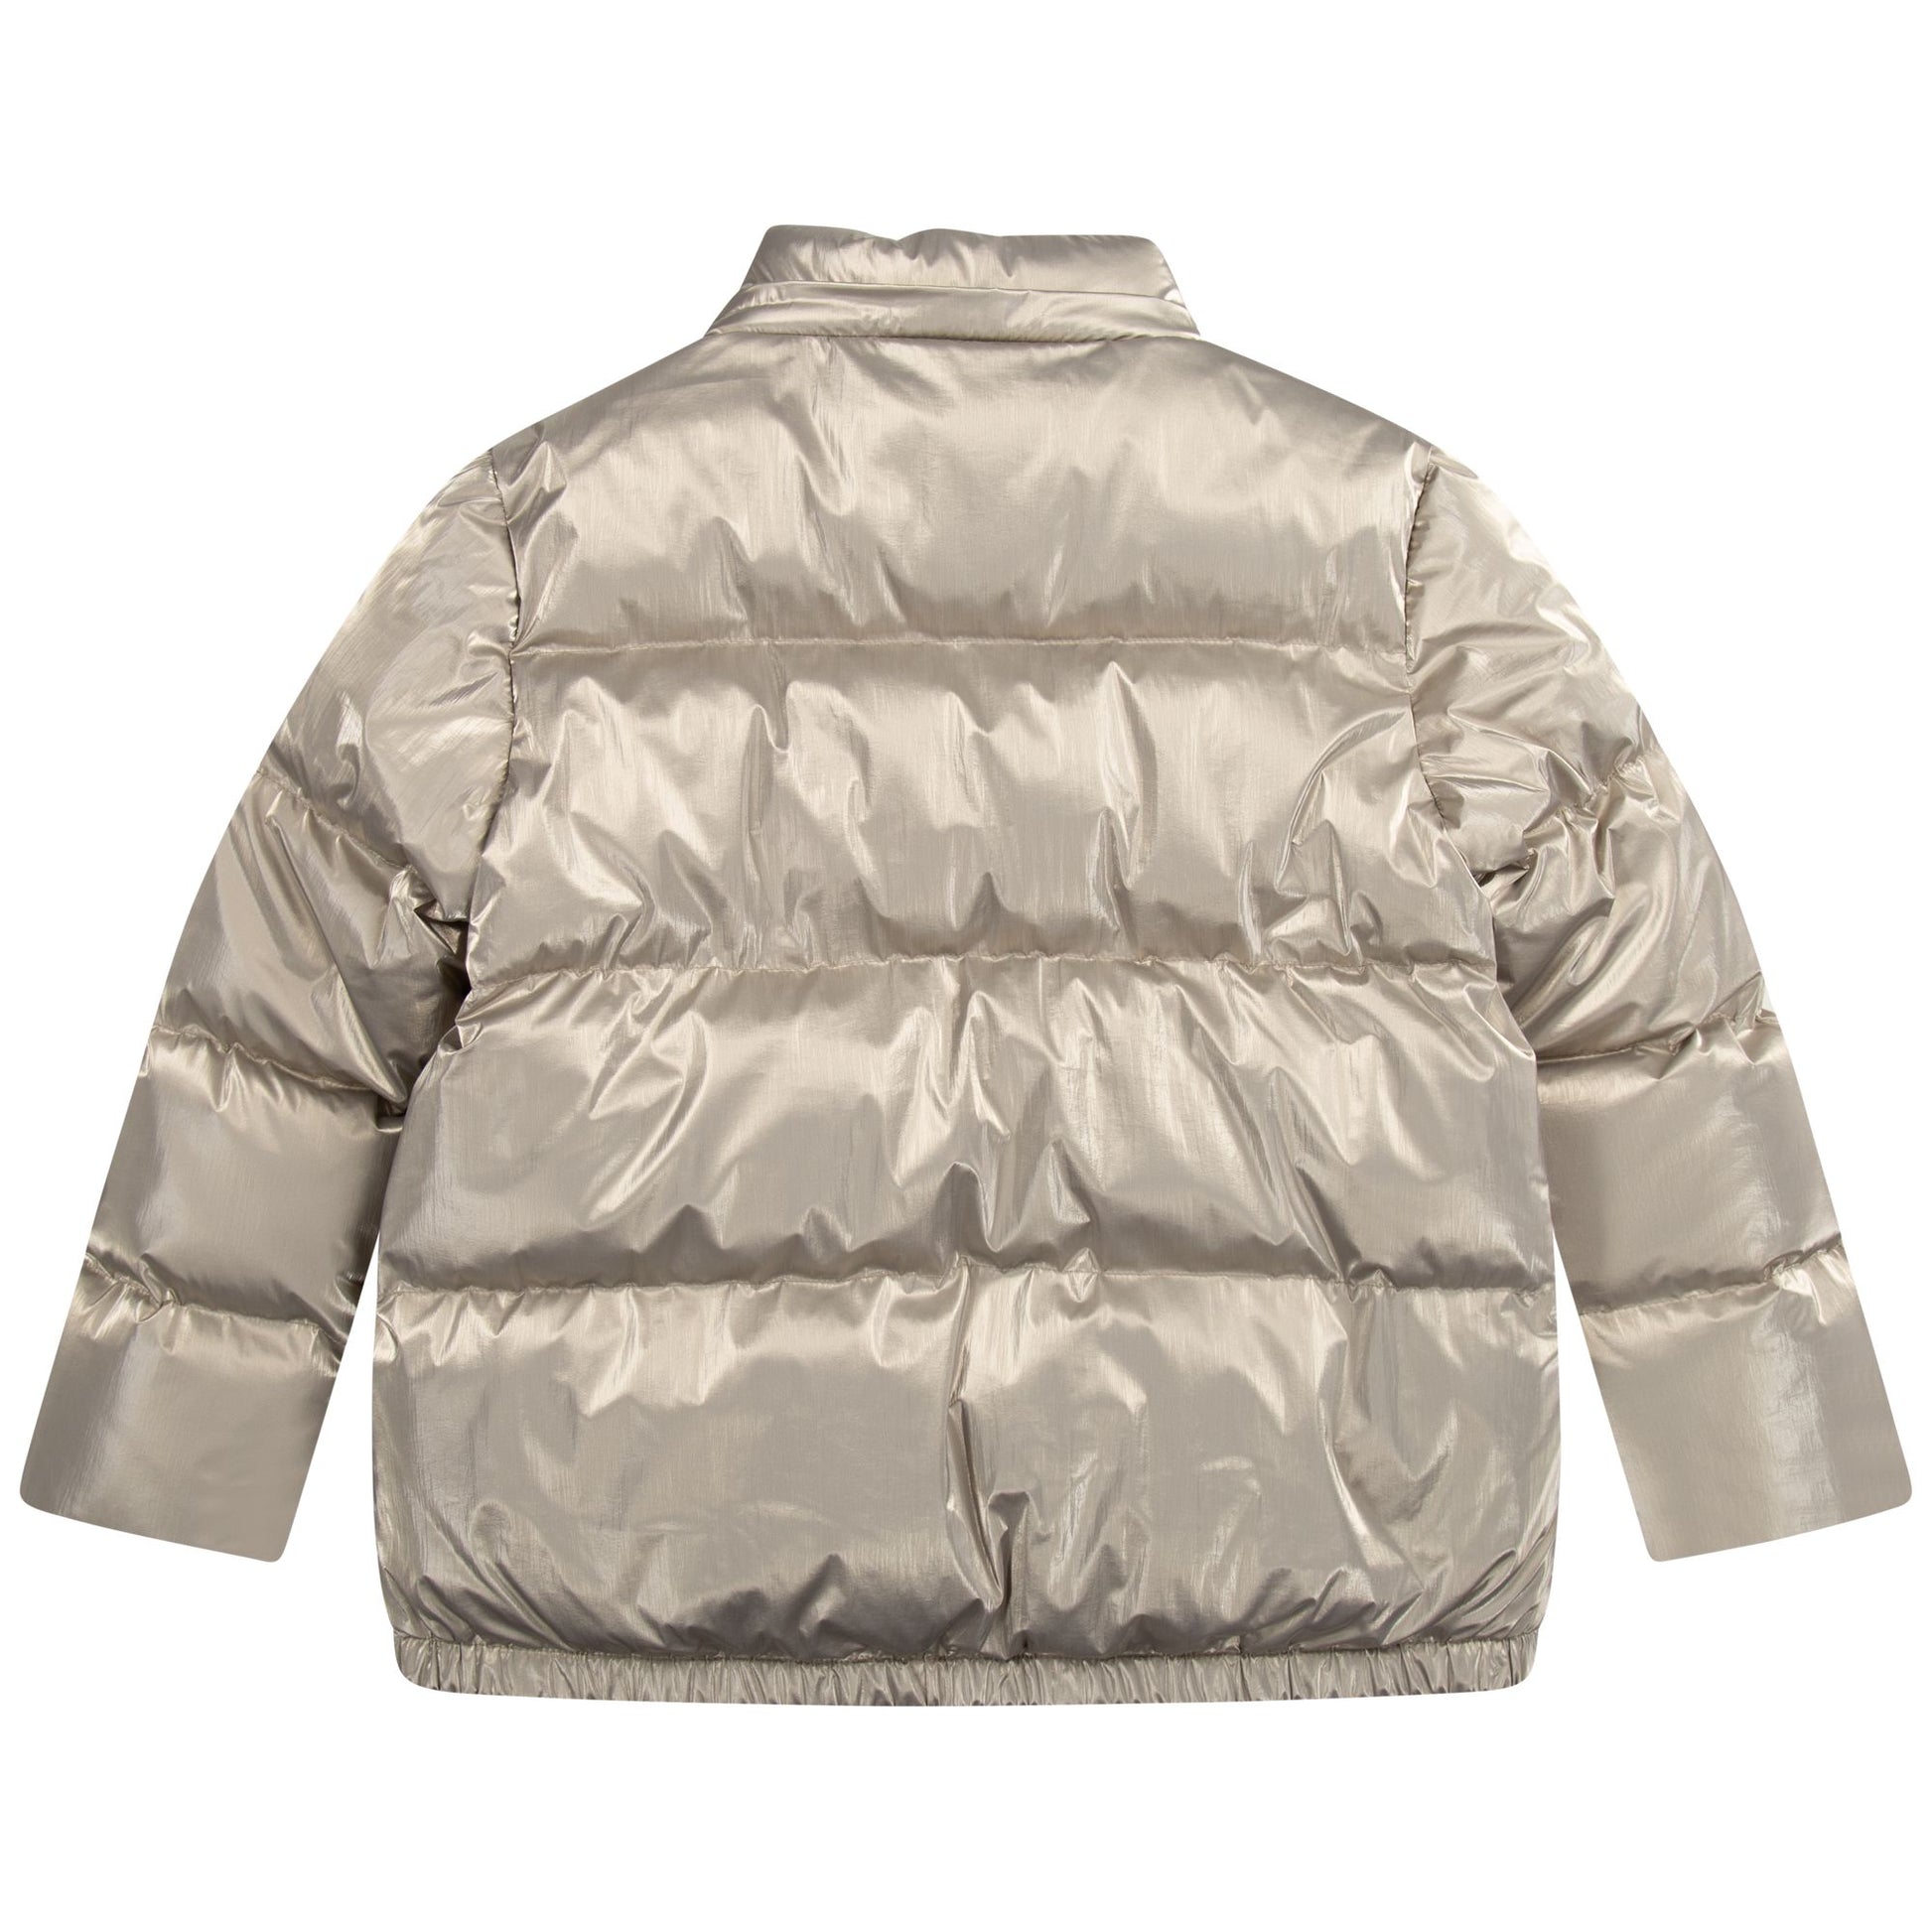 This mid-length winter warm puffer jacket from MICHAEL KORS has a modern shiny coating. An "MK" patch adorns the sleeve. This design, inspired by the adult line, fastens with a zipper and press studs. It also features a removable hood. Warm gold colour